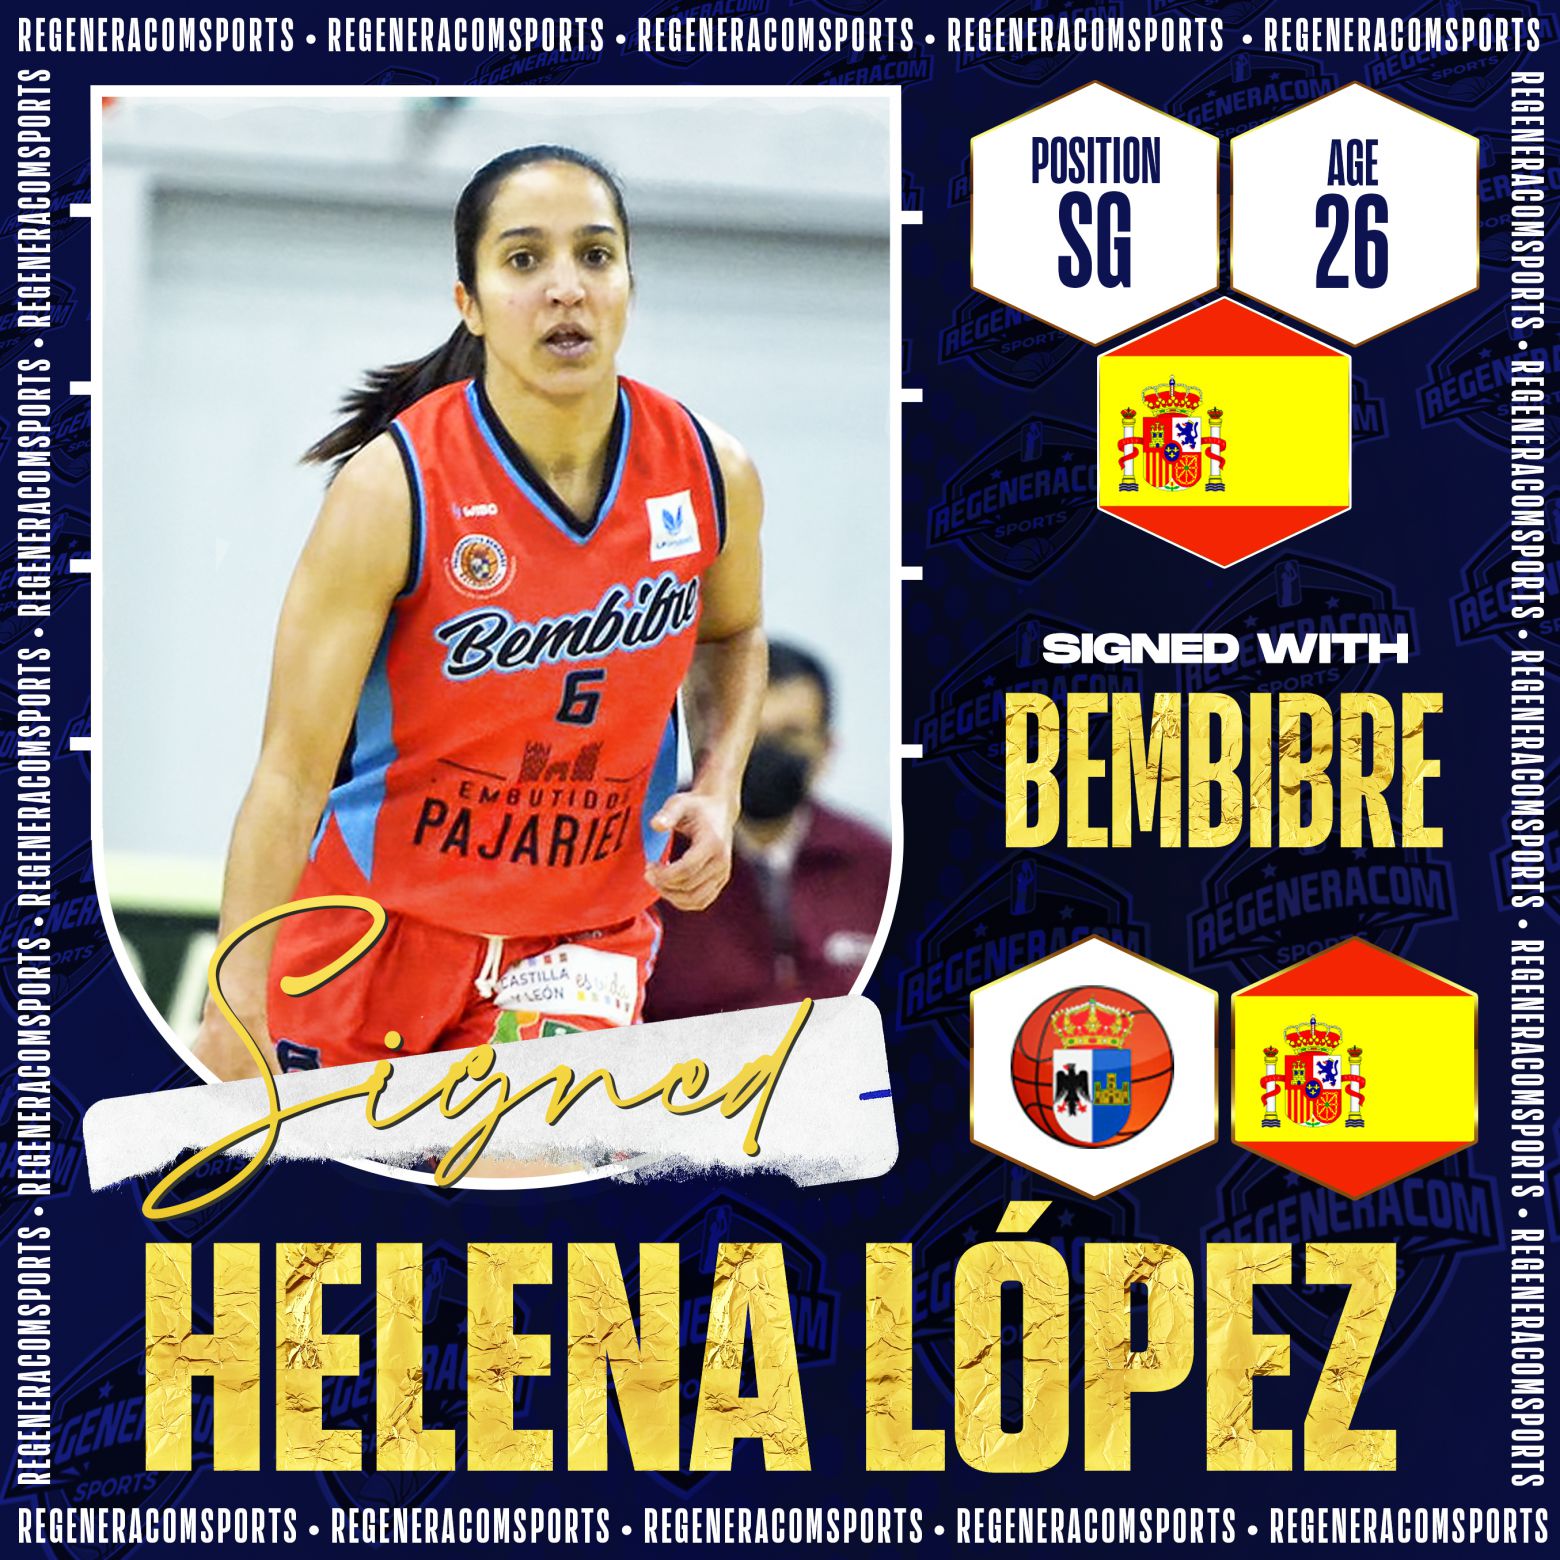 HELENA LÓPEZ has re-signed with Bembibre for the 2022/23 season